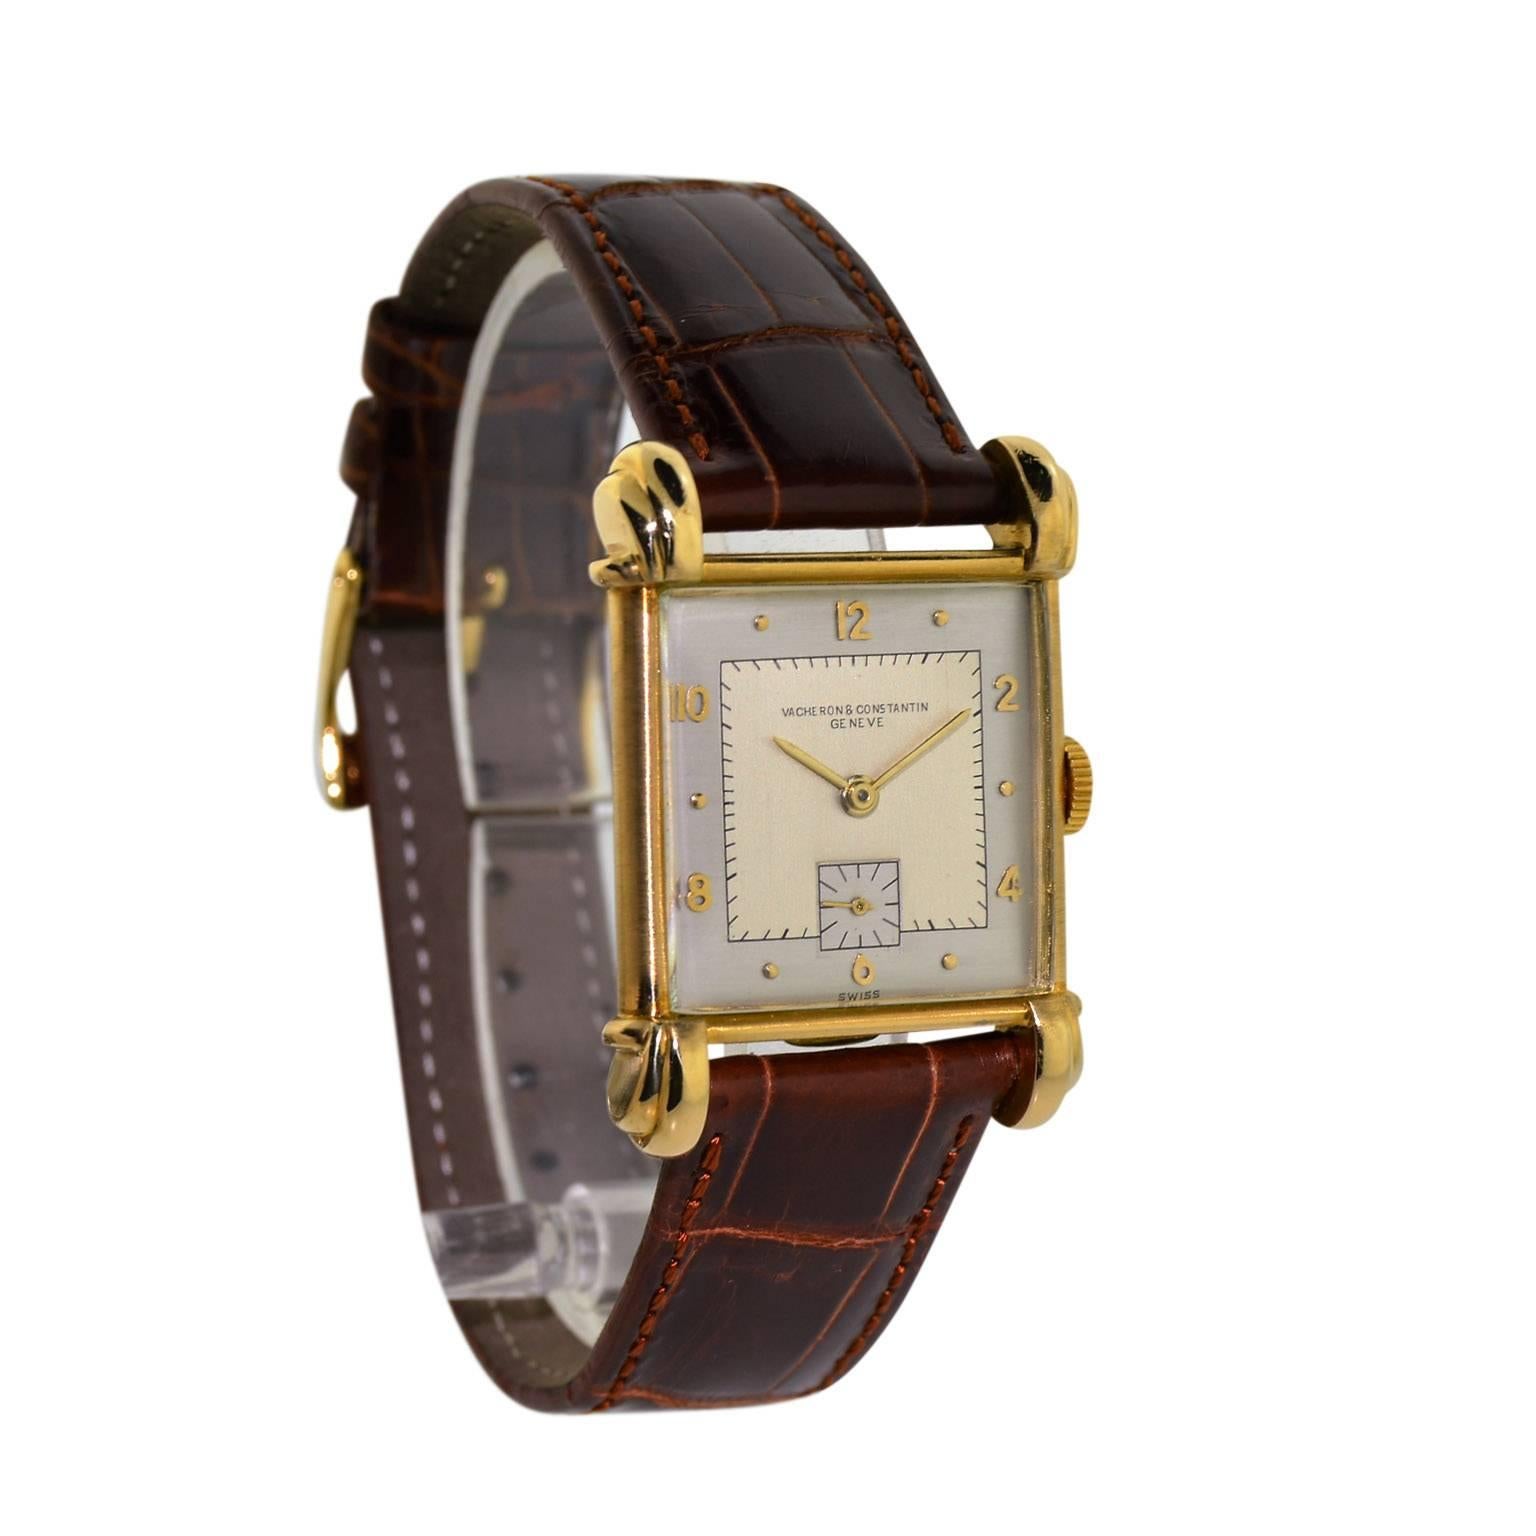 FACTORY / HOUSE: Vacheron Constantin
STYLE / REFERENCE: Art Deco 
METAL / MATERIAL: 18 Kt Yellow Gold
DIMENSIONS:  38 mm  X  28 mm
CIRCA: 1940's
MOVEMENT / CALIBER: Manual Winding / 17 Jewels 
DIAL / HANDS: Original with Sterling Silver and Kiln